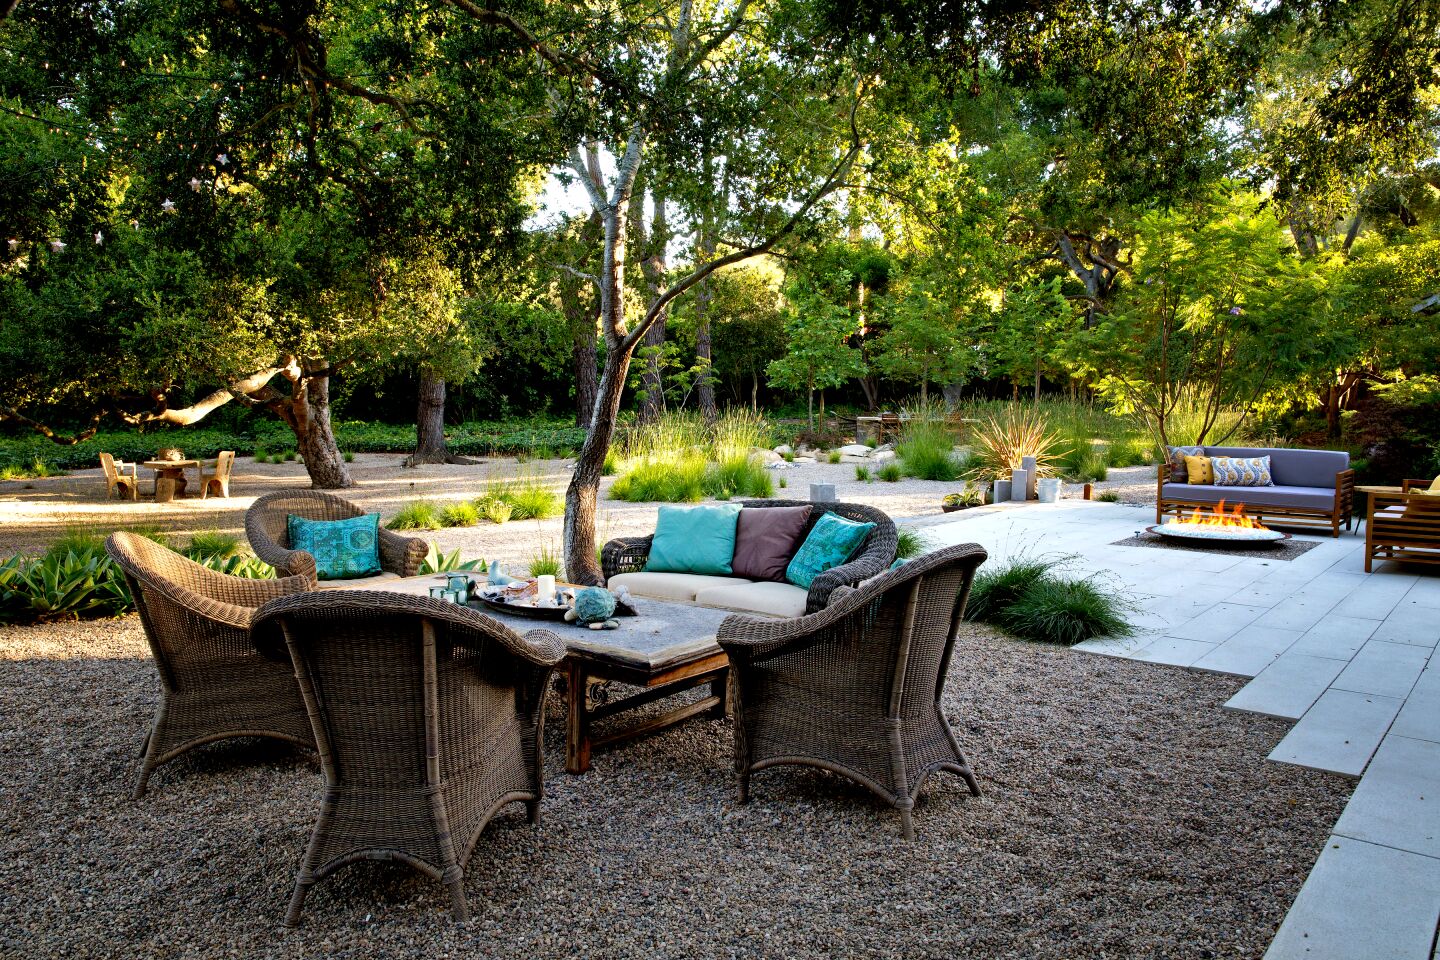 Landscape designer Margie Grace takes her cues from the Earth itself. After spearheading Grace Design and Associates for more than three decades, and curating 350-plus gardens, Grace conceived Sycamore Canyon, a verdant, 0.86-acre terraced garden landscape. With its whimsical, low-water, low-maintenance, fire-resistant design, it garnered her Designer of the Year in 2018 from the International Assn. of Professional Landscape Designers. It also happens to be her home.